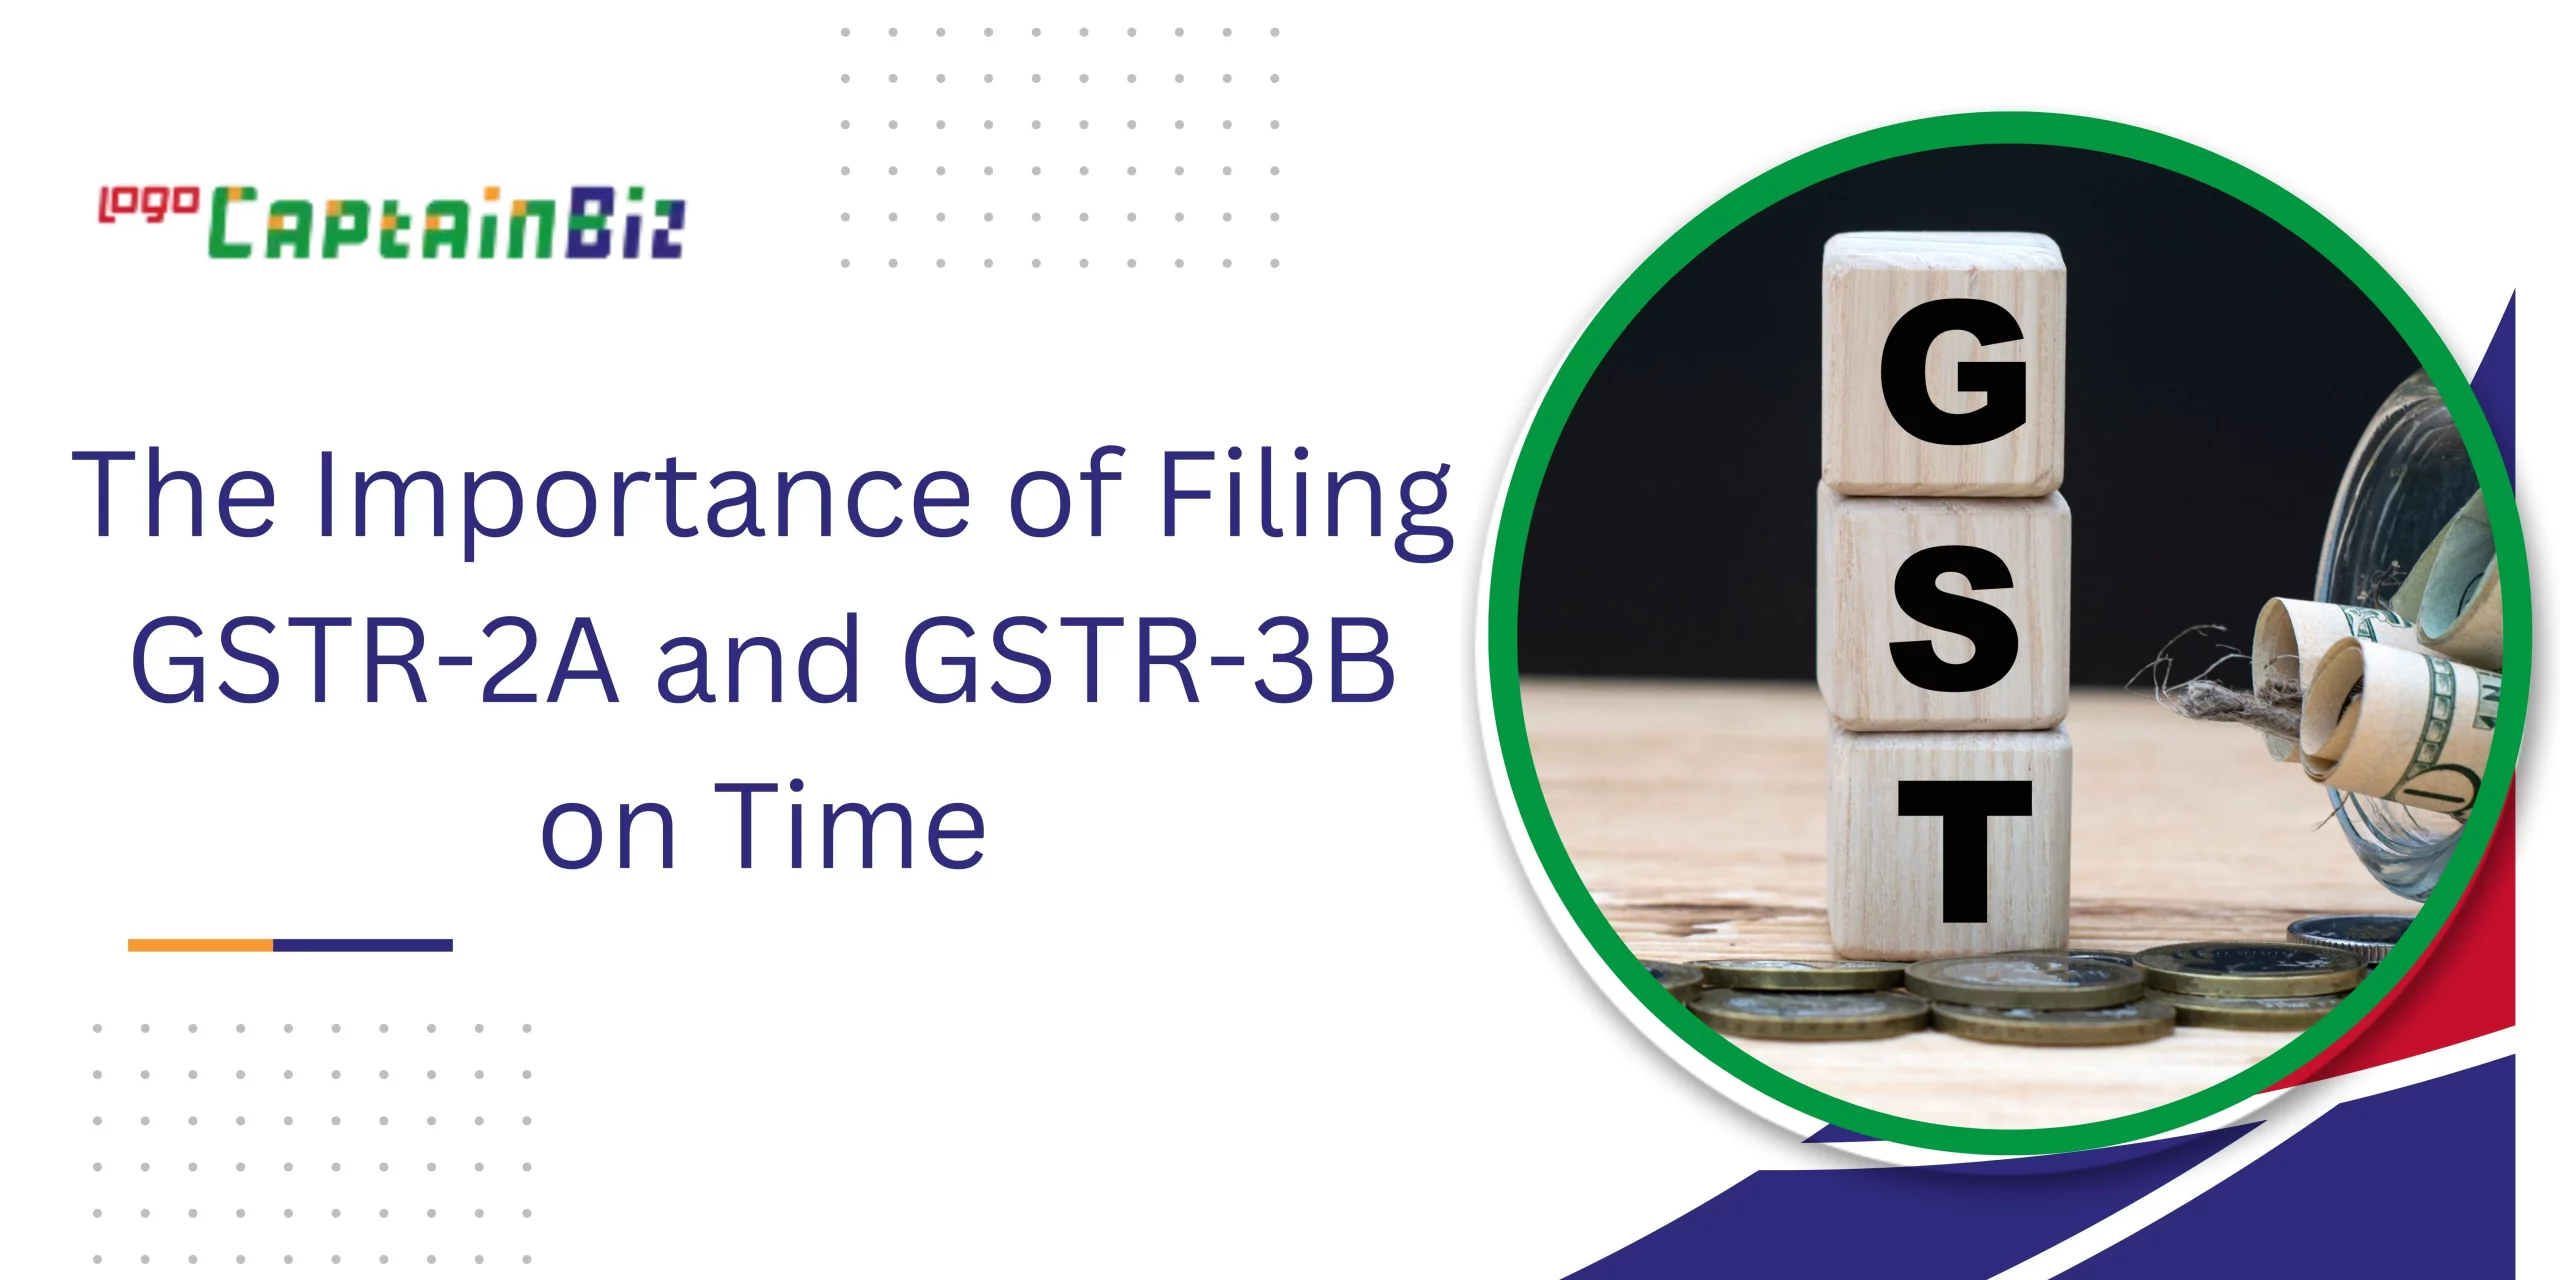 CaptainBiz: The Importance of Filing GSTR-2A and GSTR-3B on Time 1